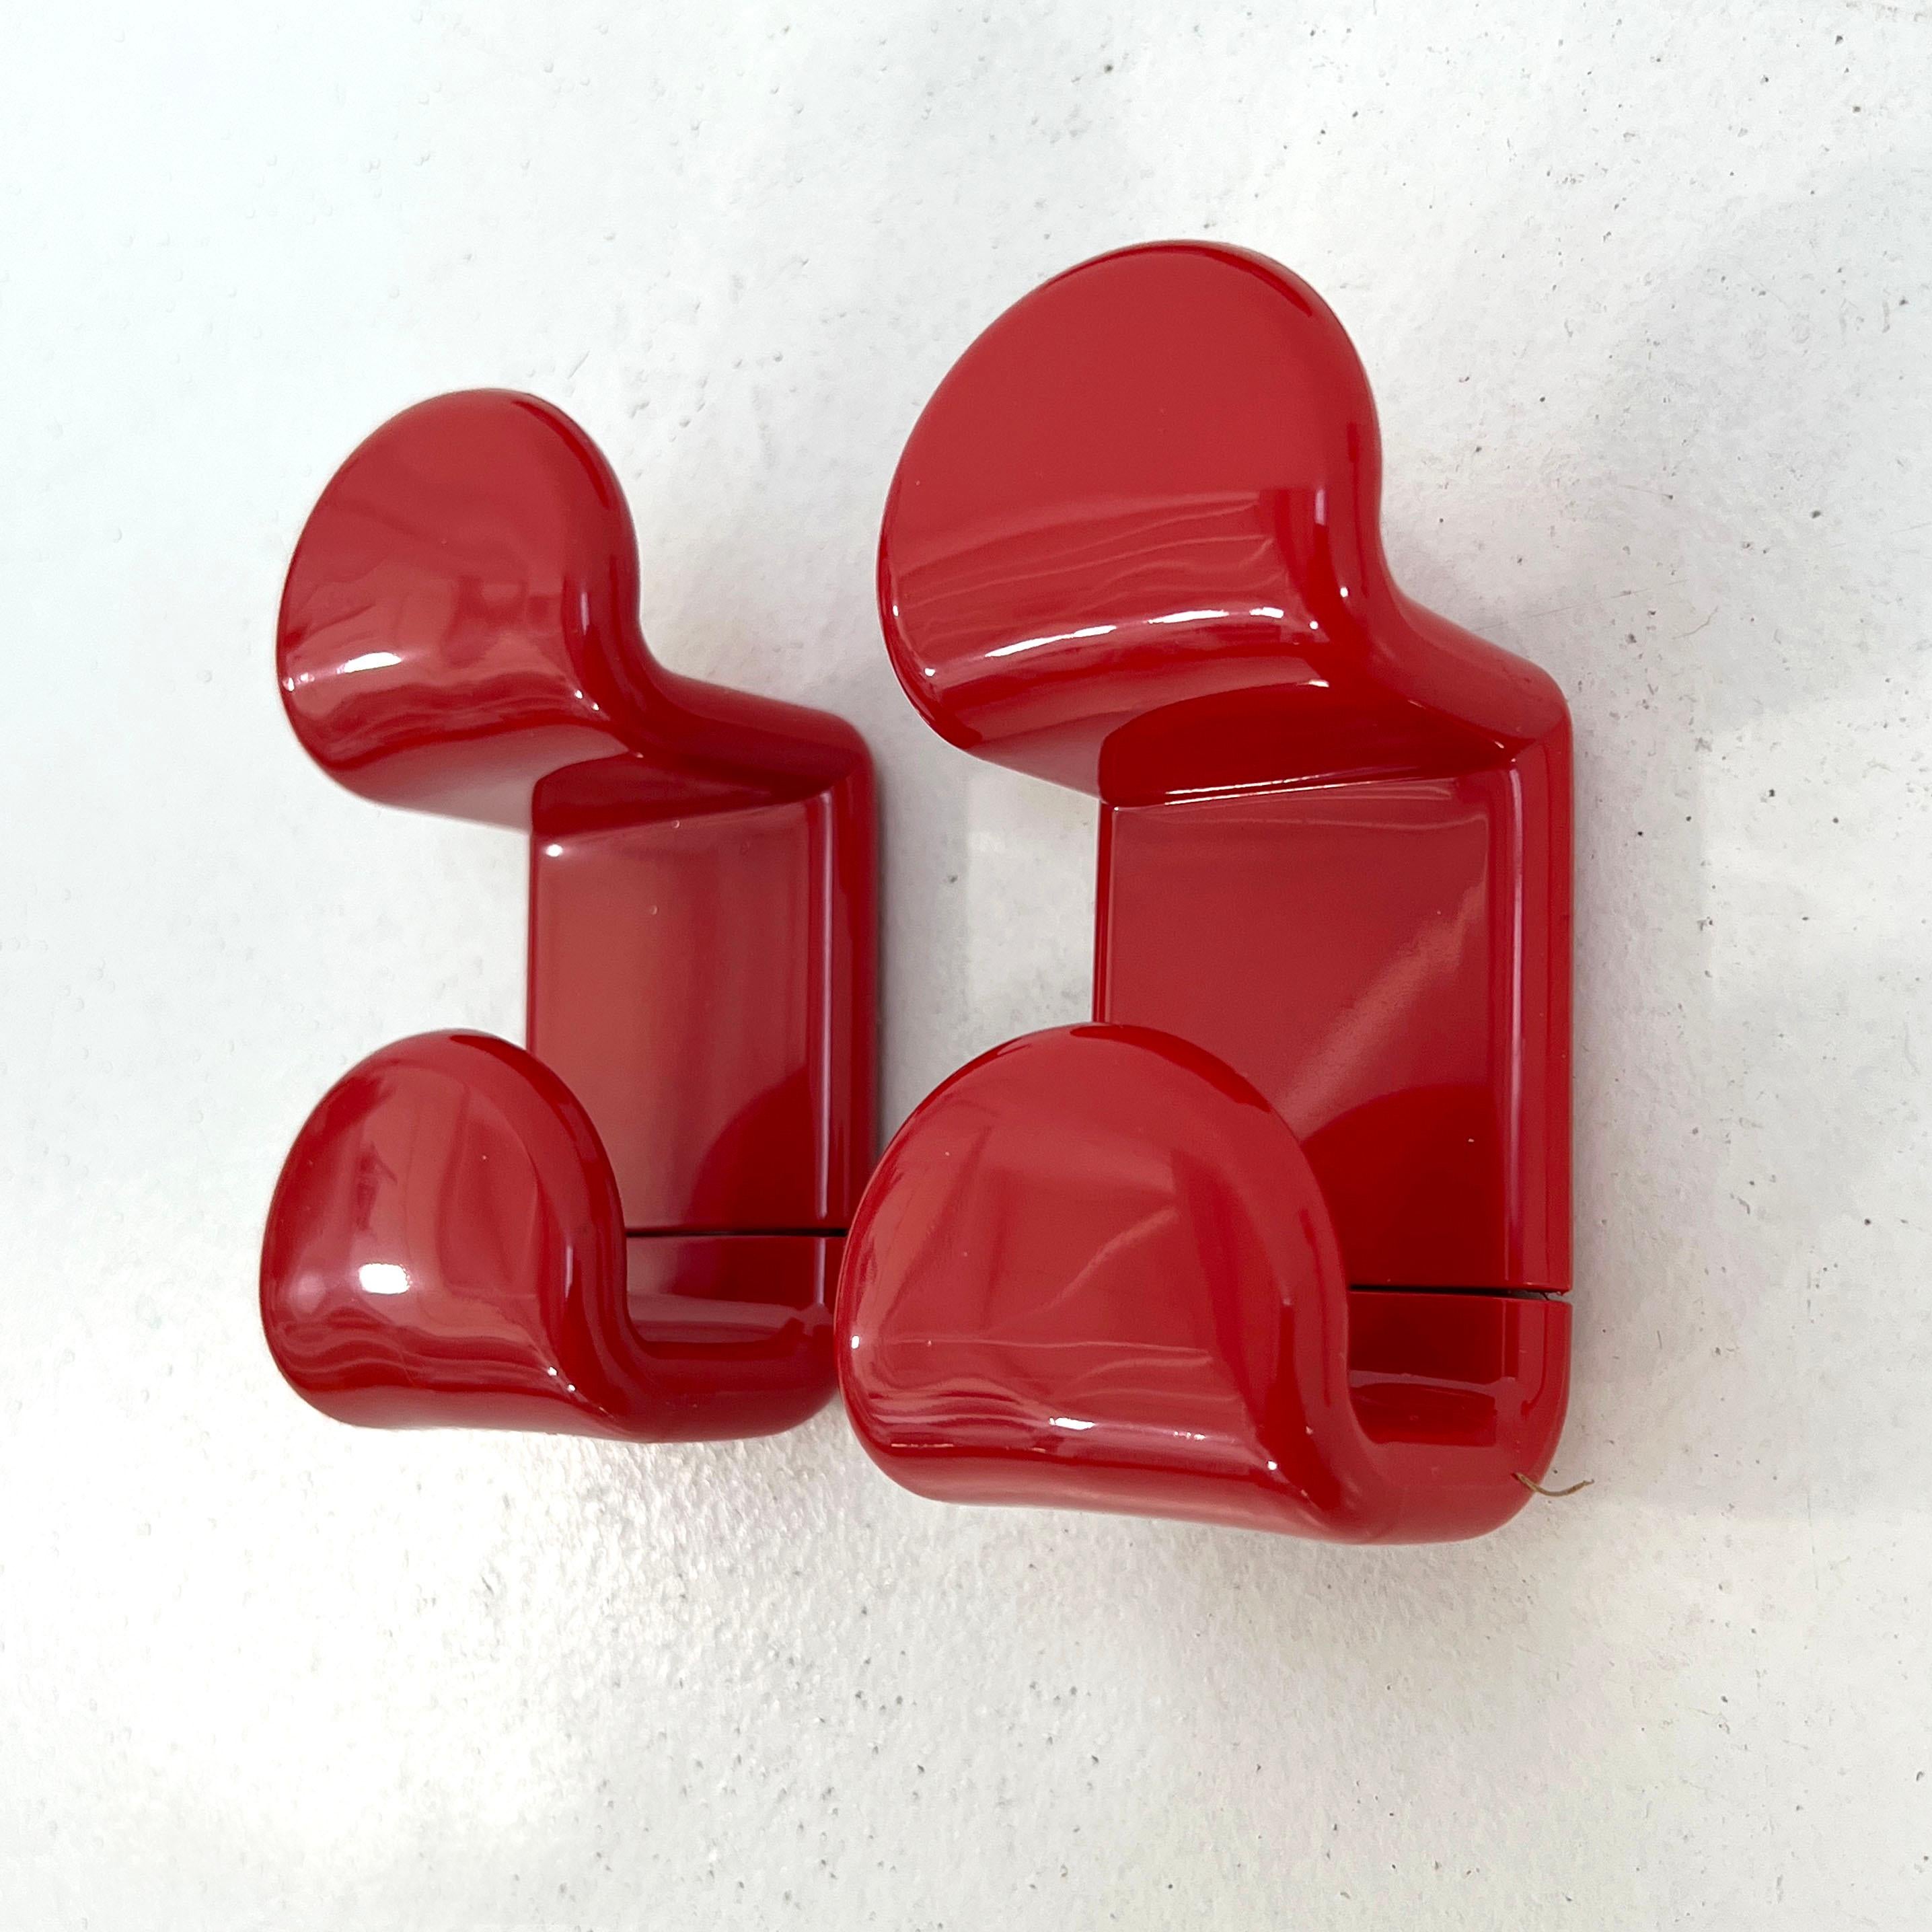 Italian Red Bathroom Set with Medicine Cabinet by Olaf Von Bohr for Gedy, 1970s